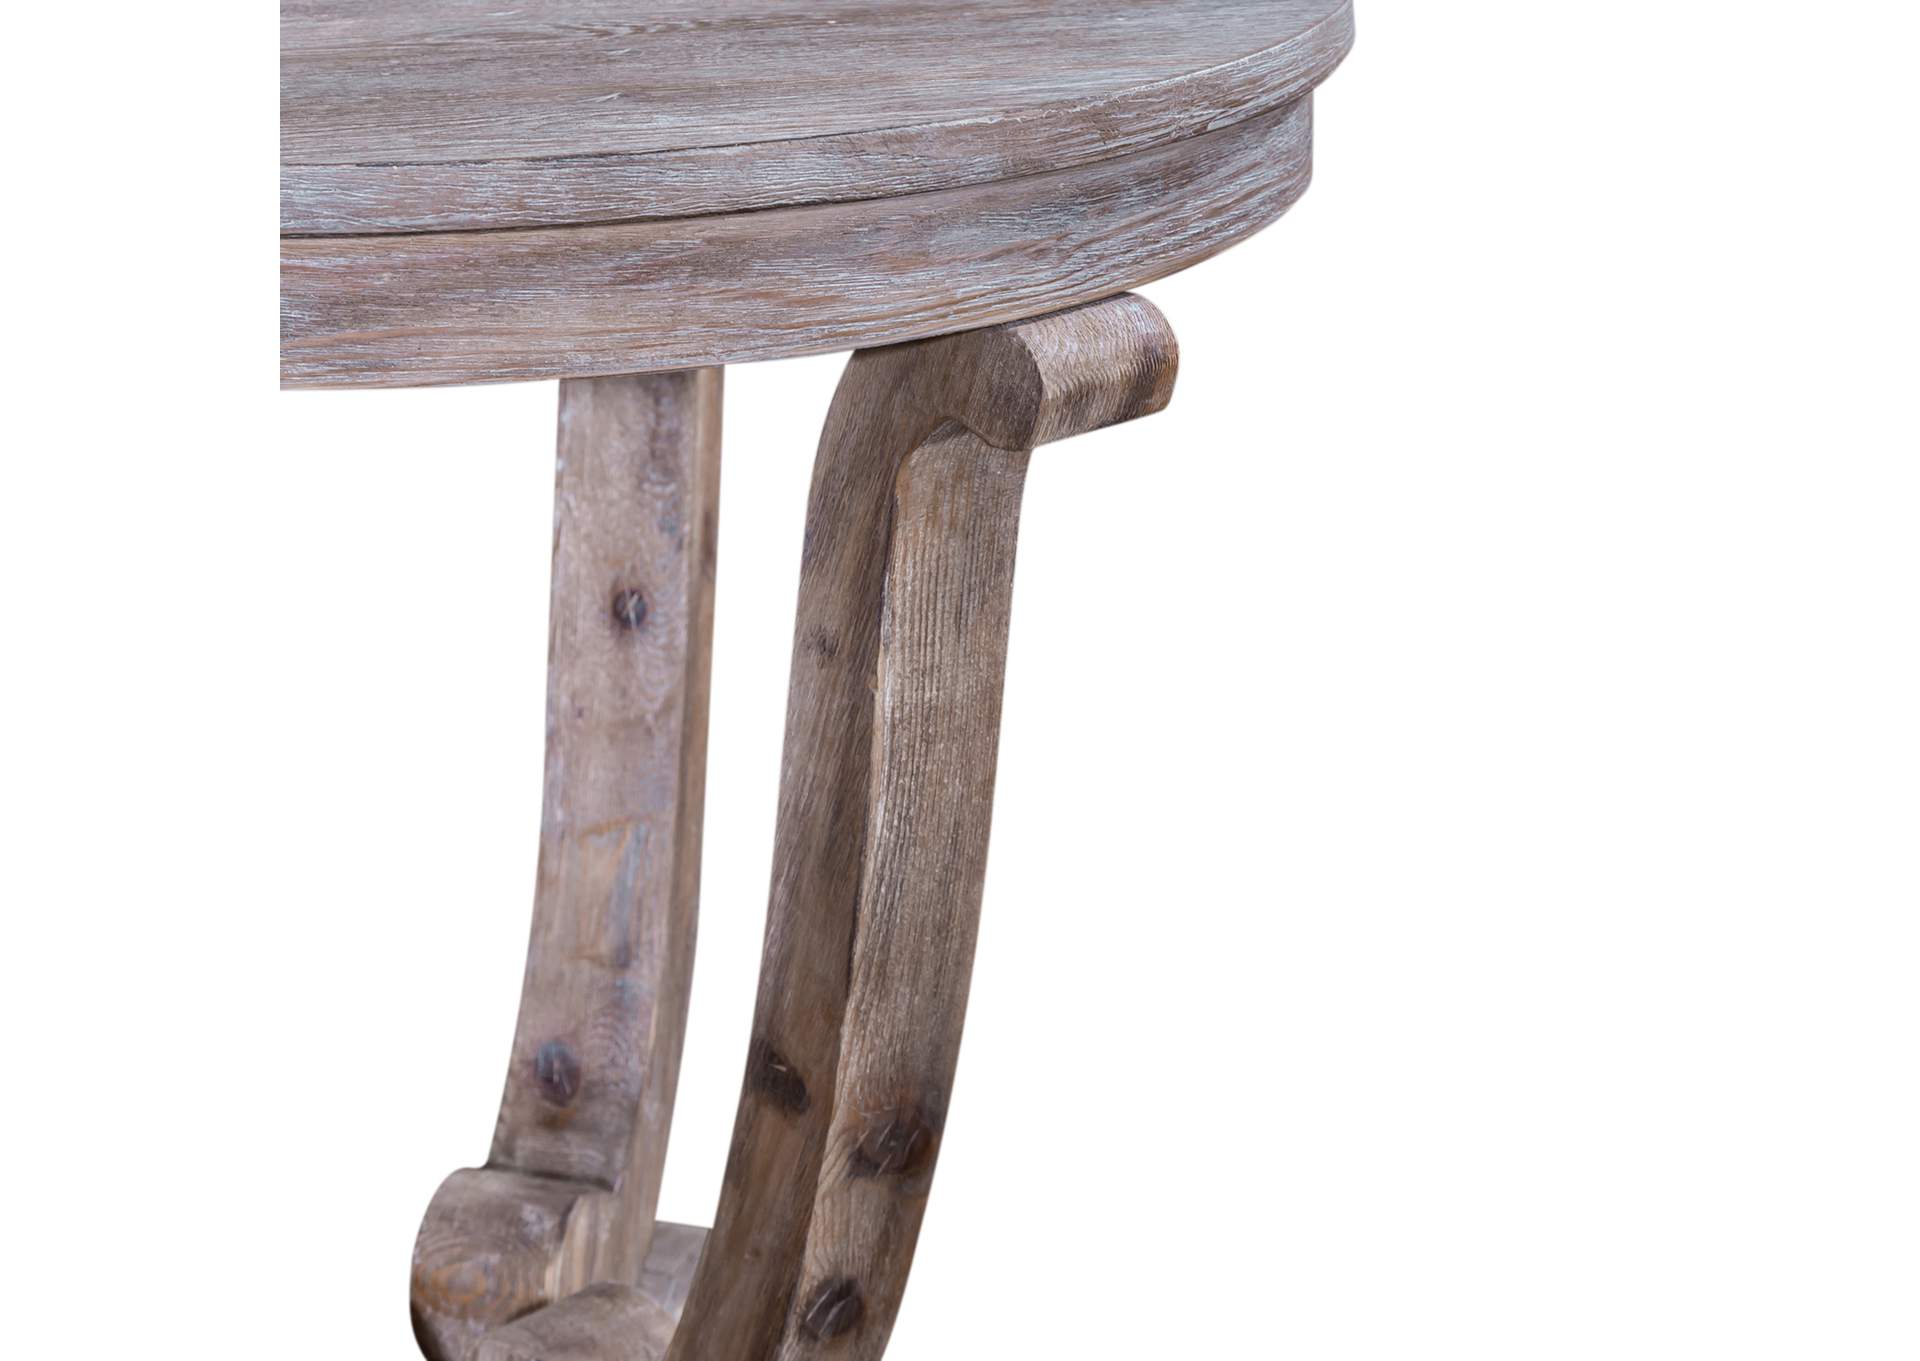 Greystone Mill End Table,Liberty